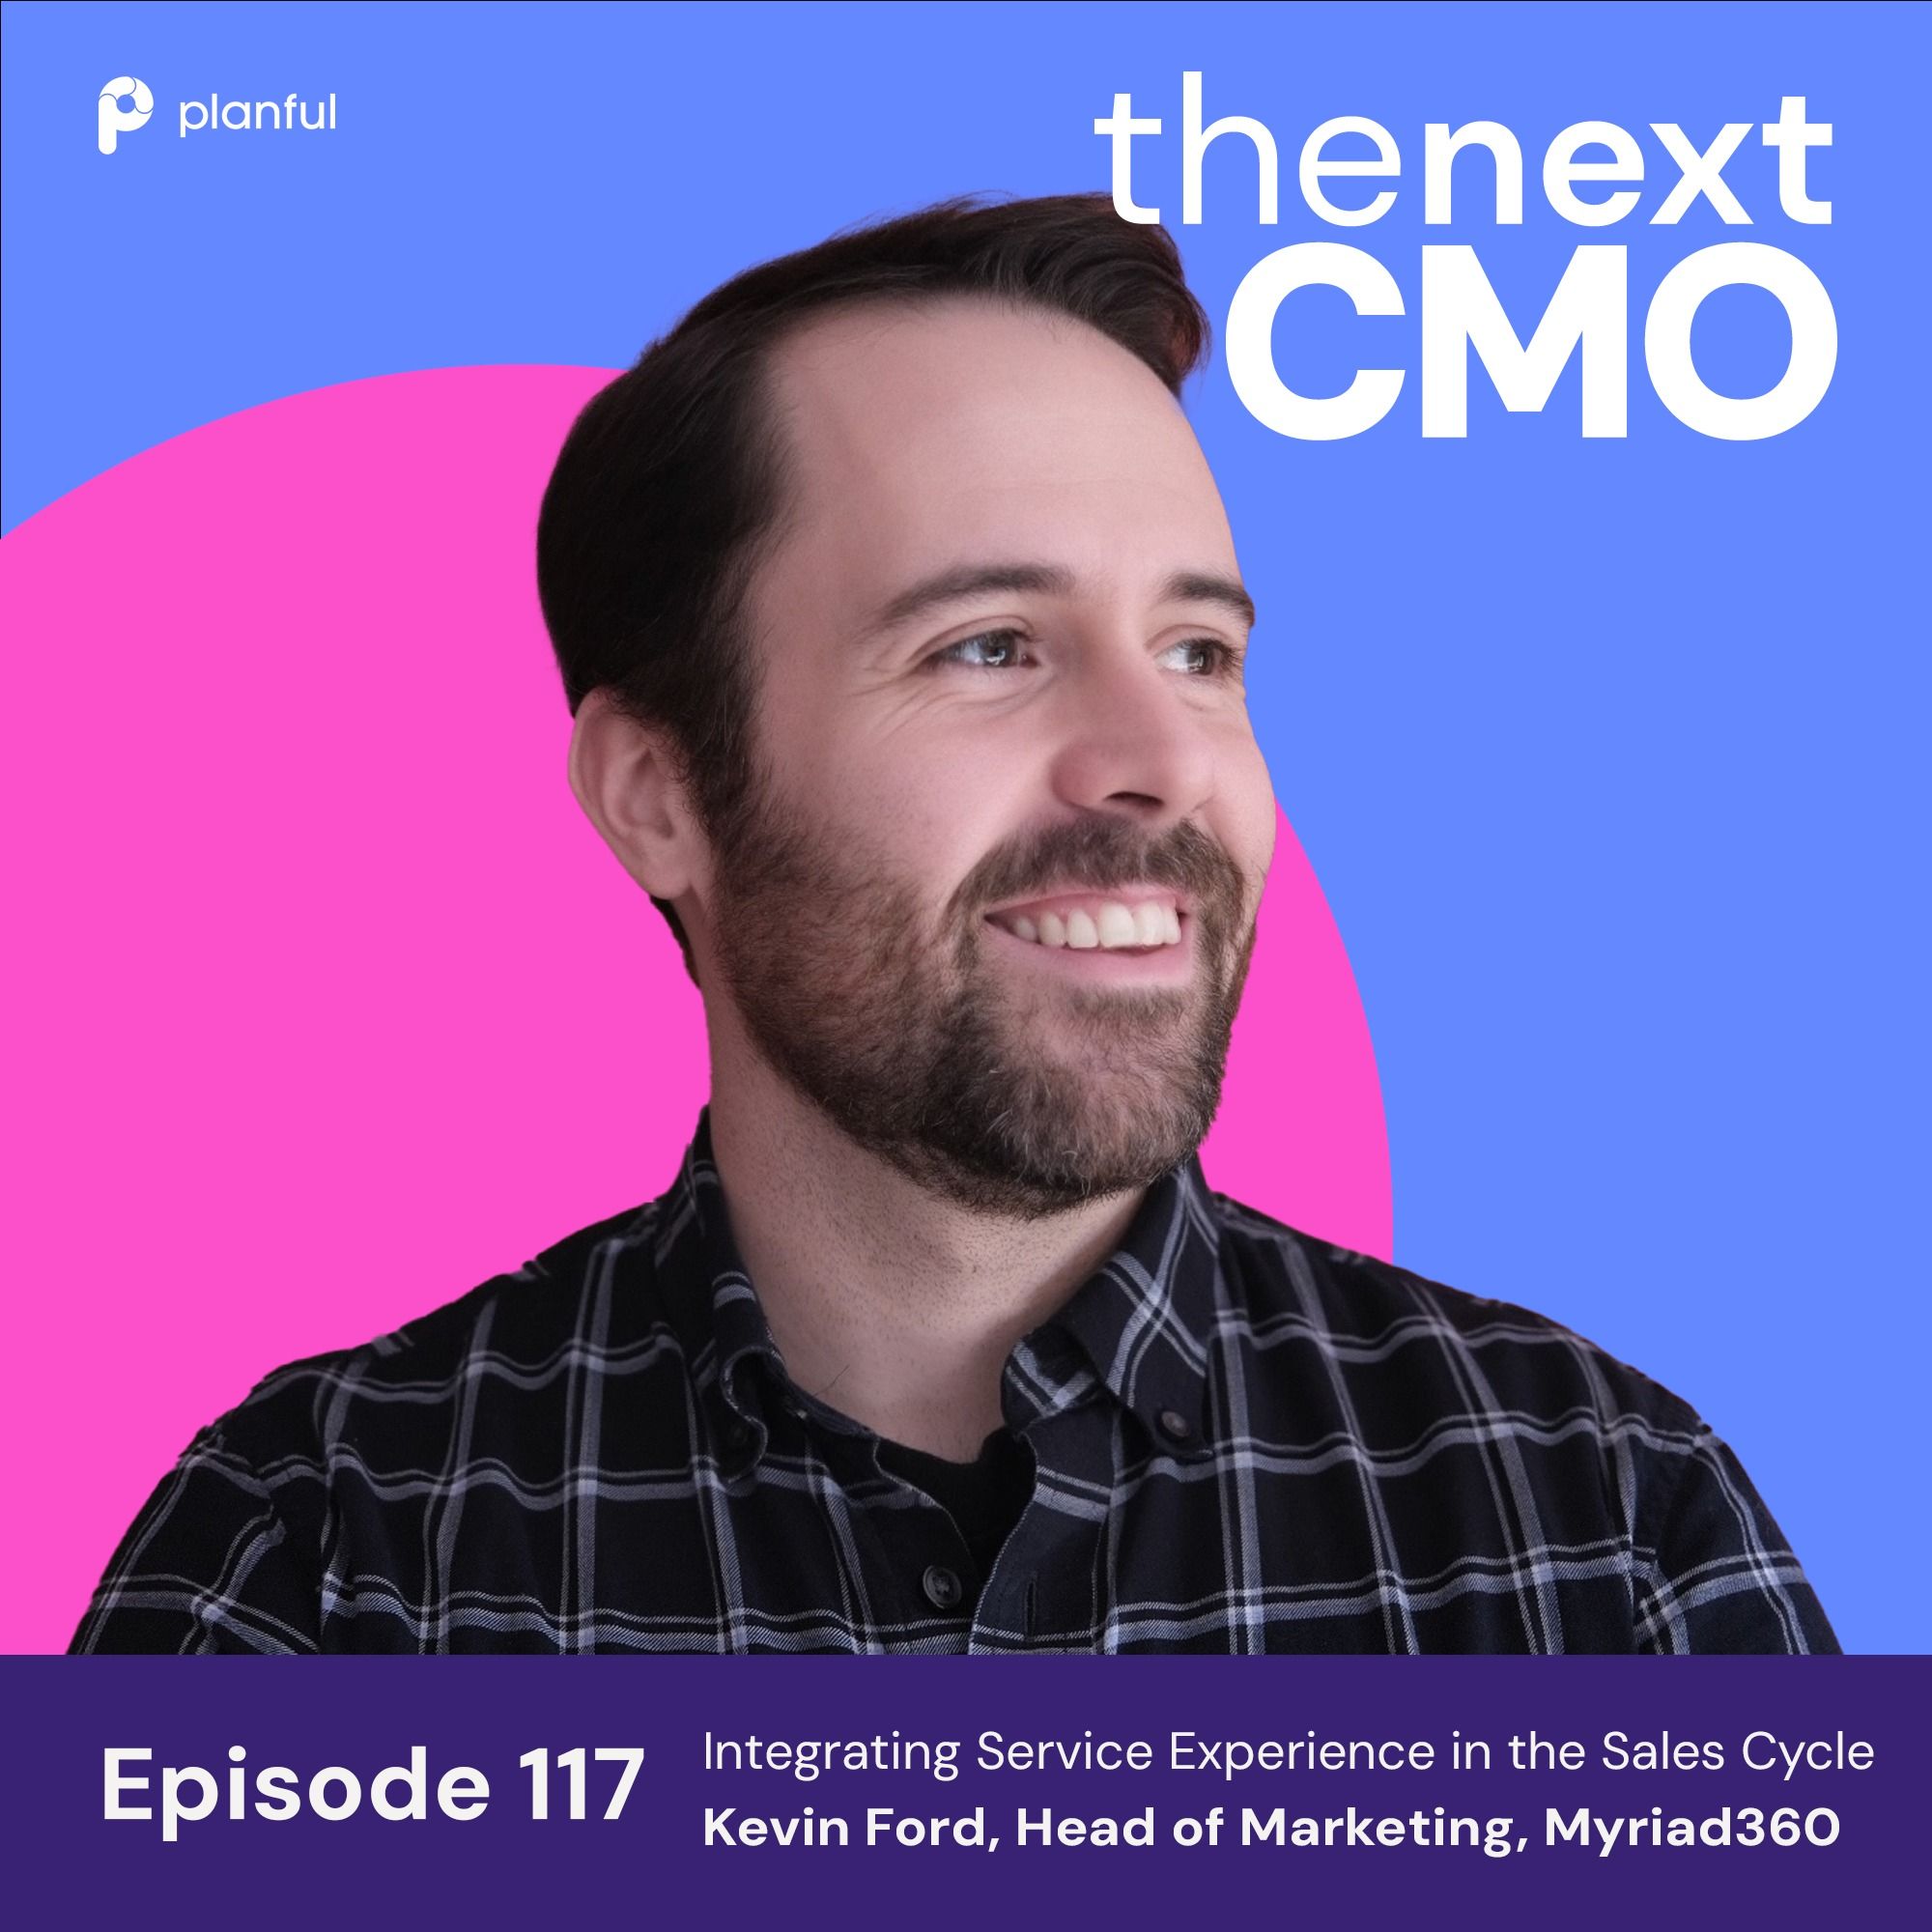 Integrating Service Experience in the Sales Cycle with Kevin Ford of Myriad360